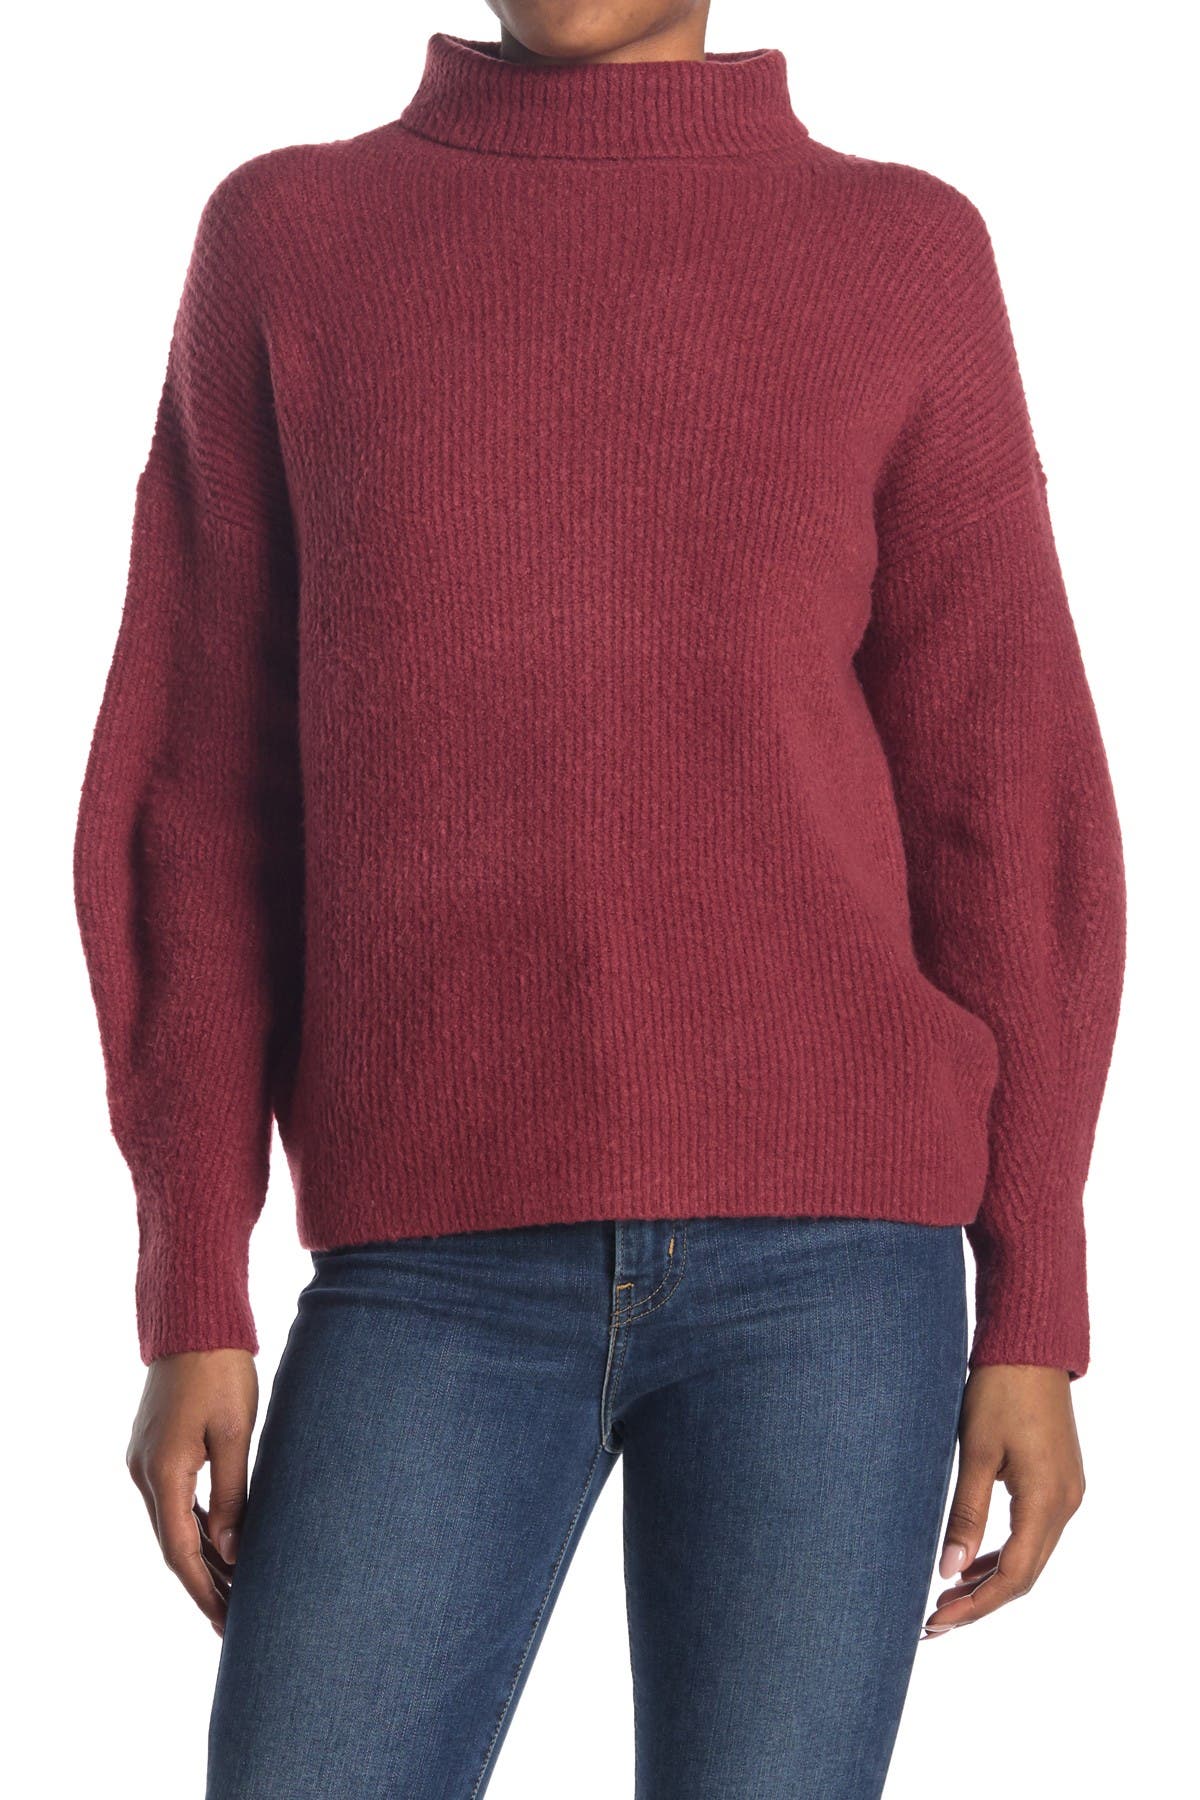 French Connection Flossy Ribbed Turtleneck Sweater In Open Red4